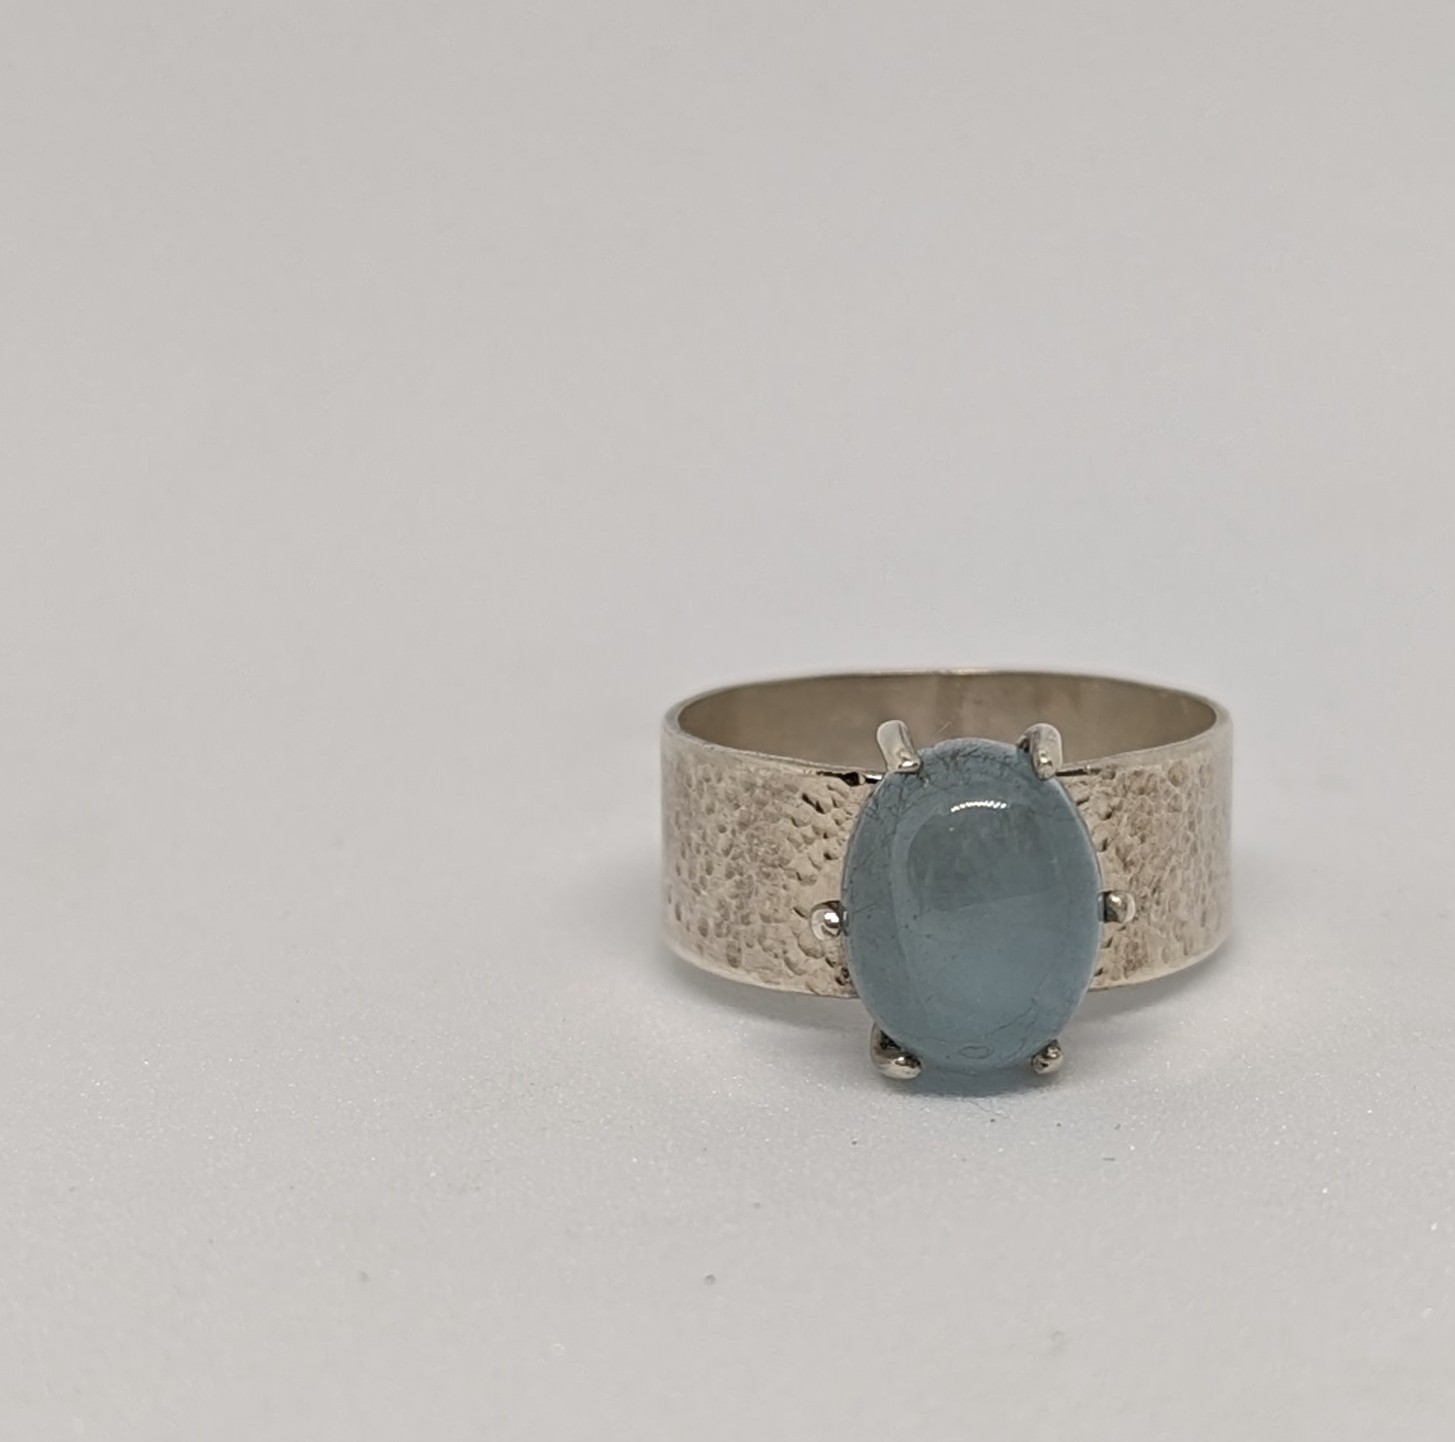 a silver ring with a blue stone